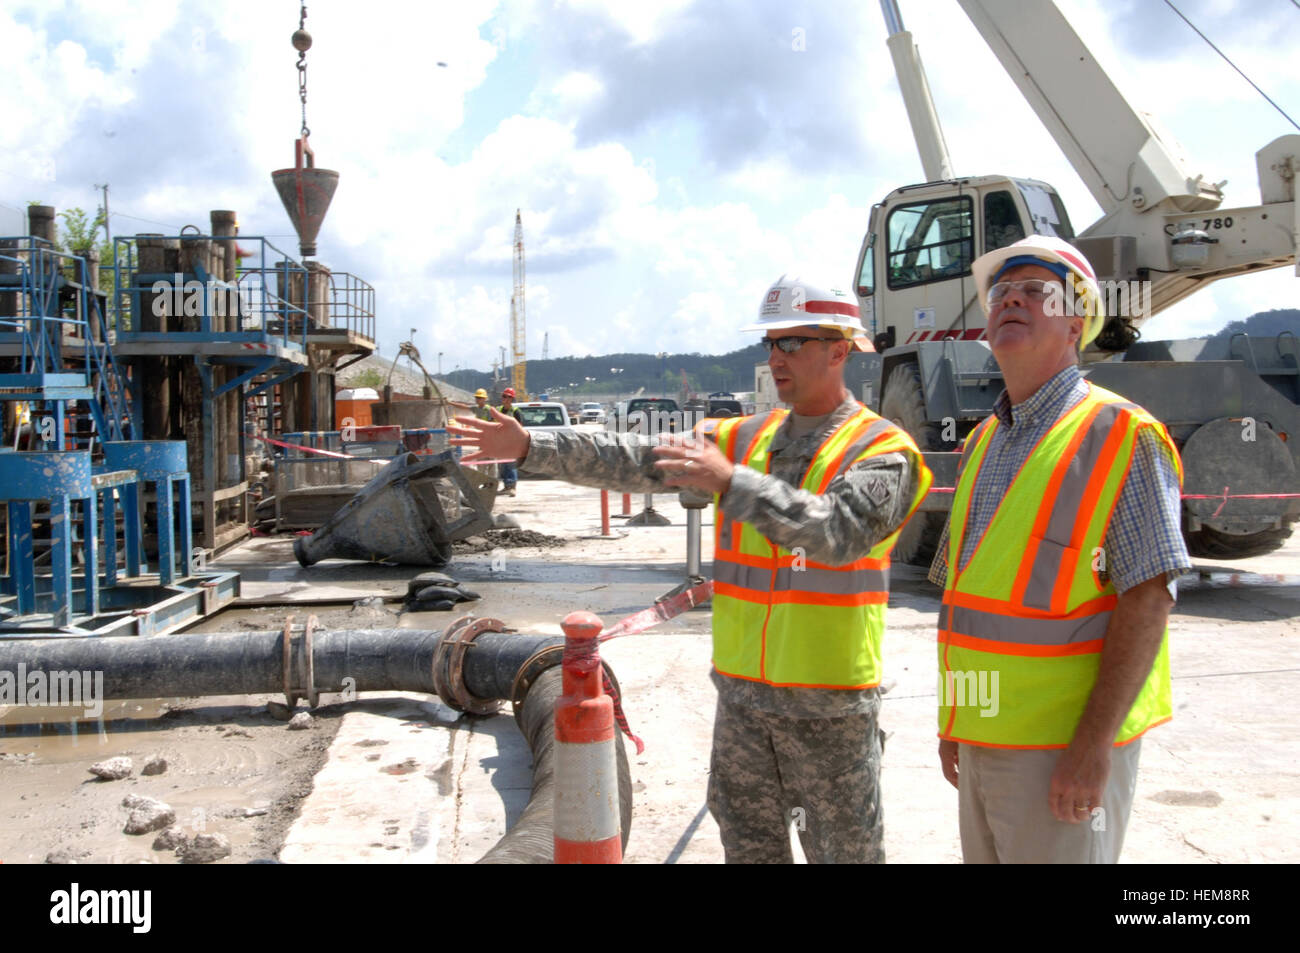 Lt. Col. James A. DeLapp, U.S. Army Corps of Engineers Nashville District commander, leads Nashville Mayor Karl Dean on a tour of the work platform at Wolf Creek Dam Aug. 7, 2012 where construction is ongoing to install a barrier wall through the embankment deep into bedrock below the foundation (USACE photo by Leon Roberts) Nashville mayor goes up river to see dam safety project 120807-A-EO110-005 Stock Photo